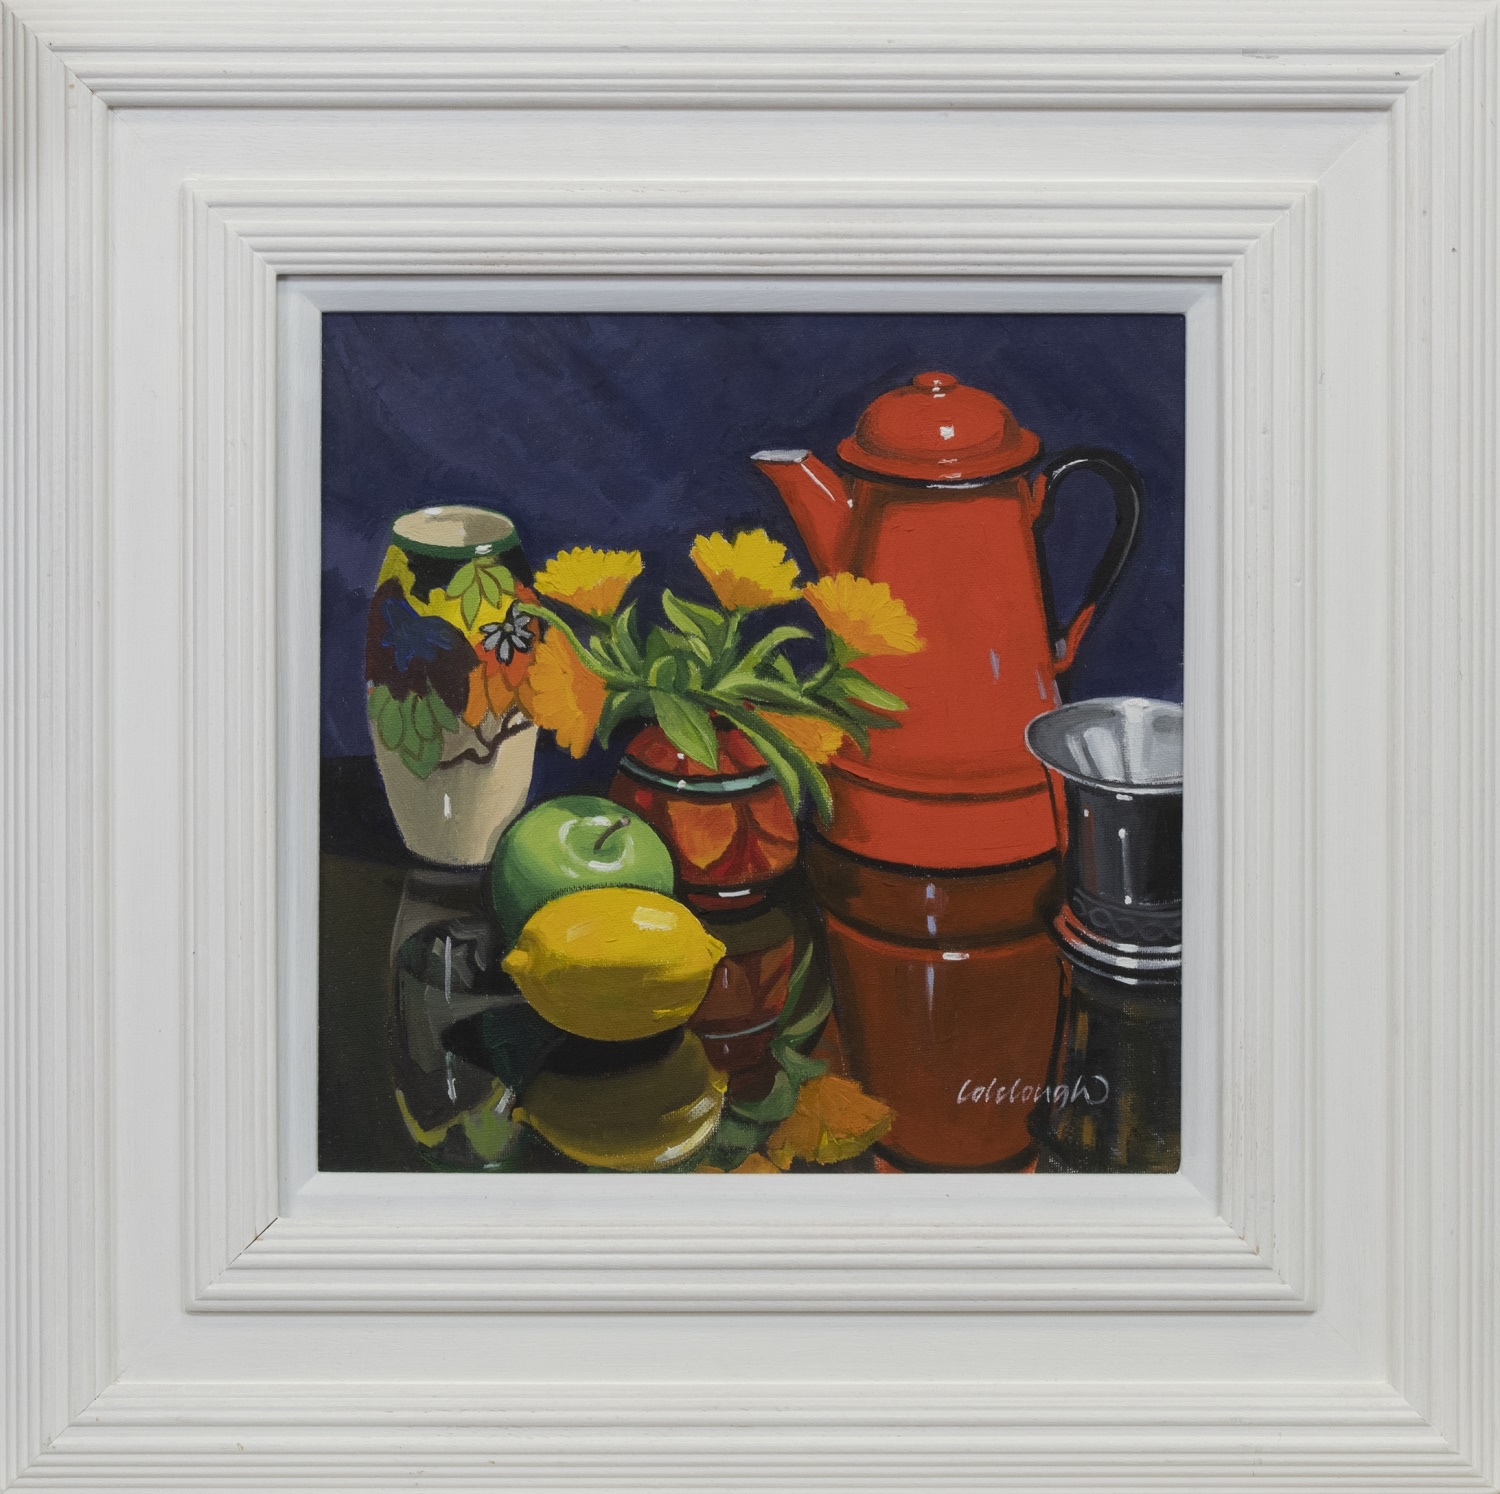 COFFEE POT STUDY WITH MARIGOLDS, AN OIL BY FRANK COLCOUGH